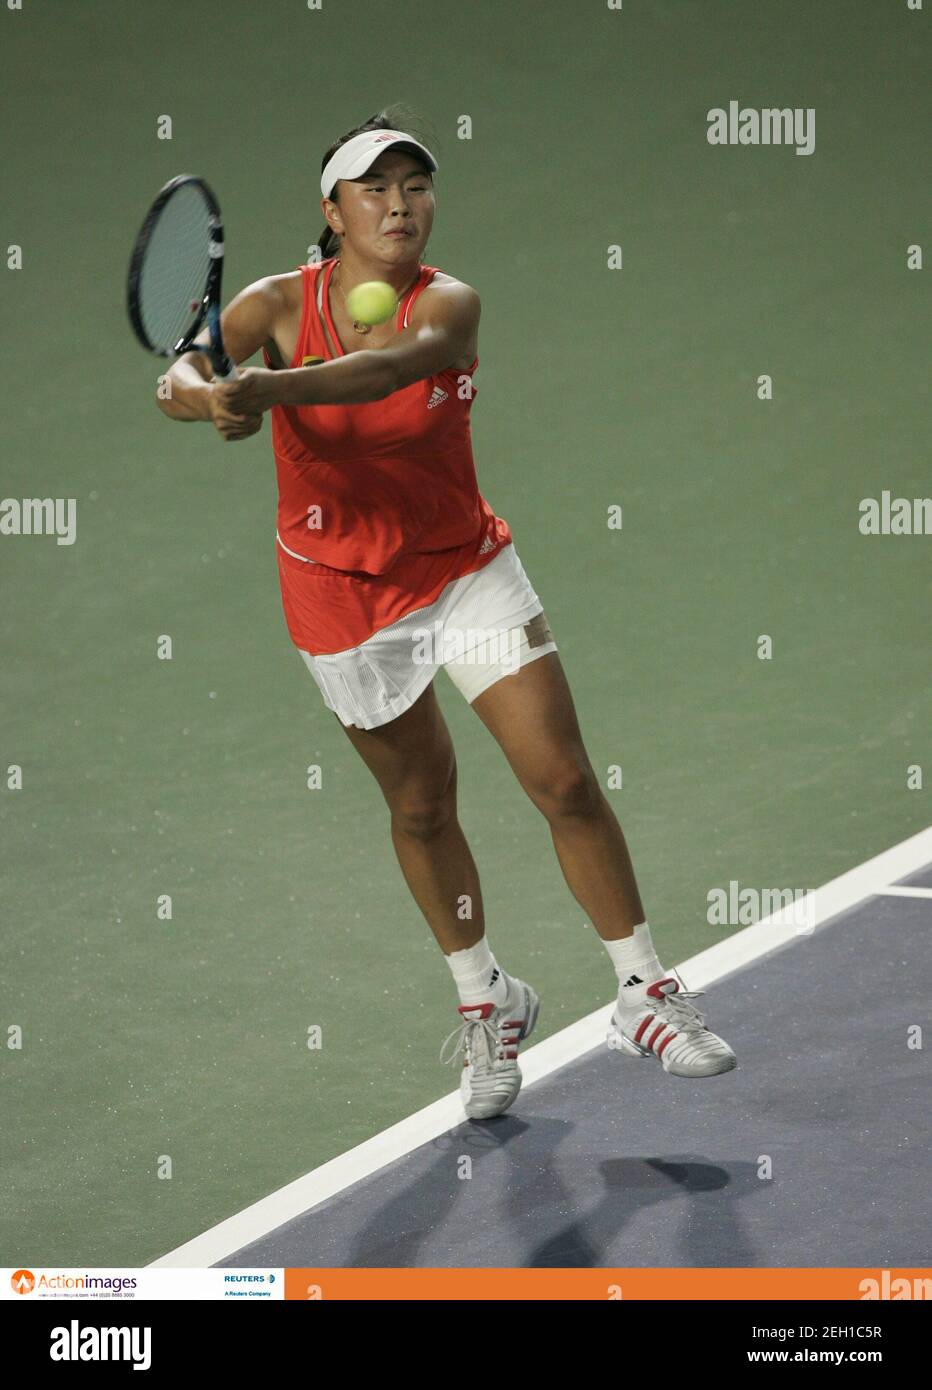 Tennis - Sony Ericsson WTA Tour - China Open - Beijing, China - 22/9/07  Shuai Peng of China in action during the semi final Mandatory Credit:  Action Images / Brandon Malone Livepic Stock Photo - Alamy